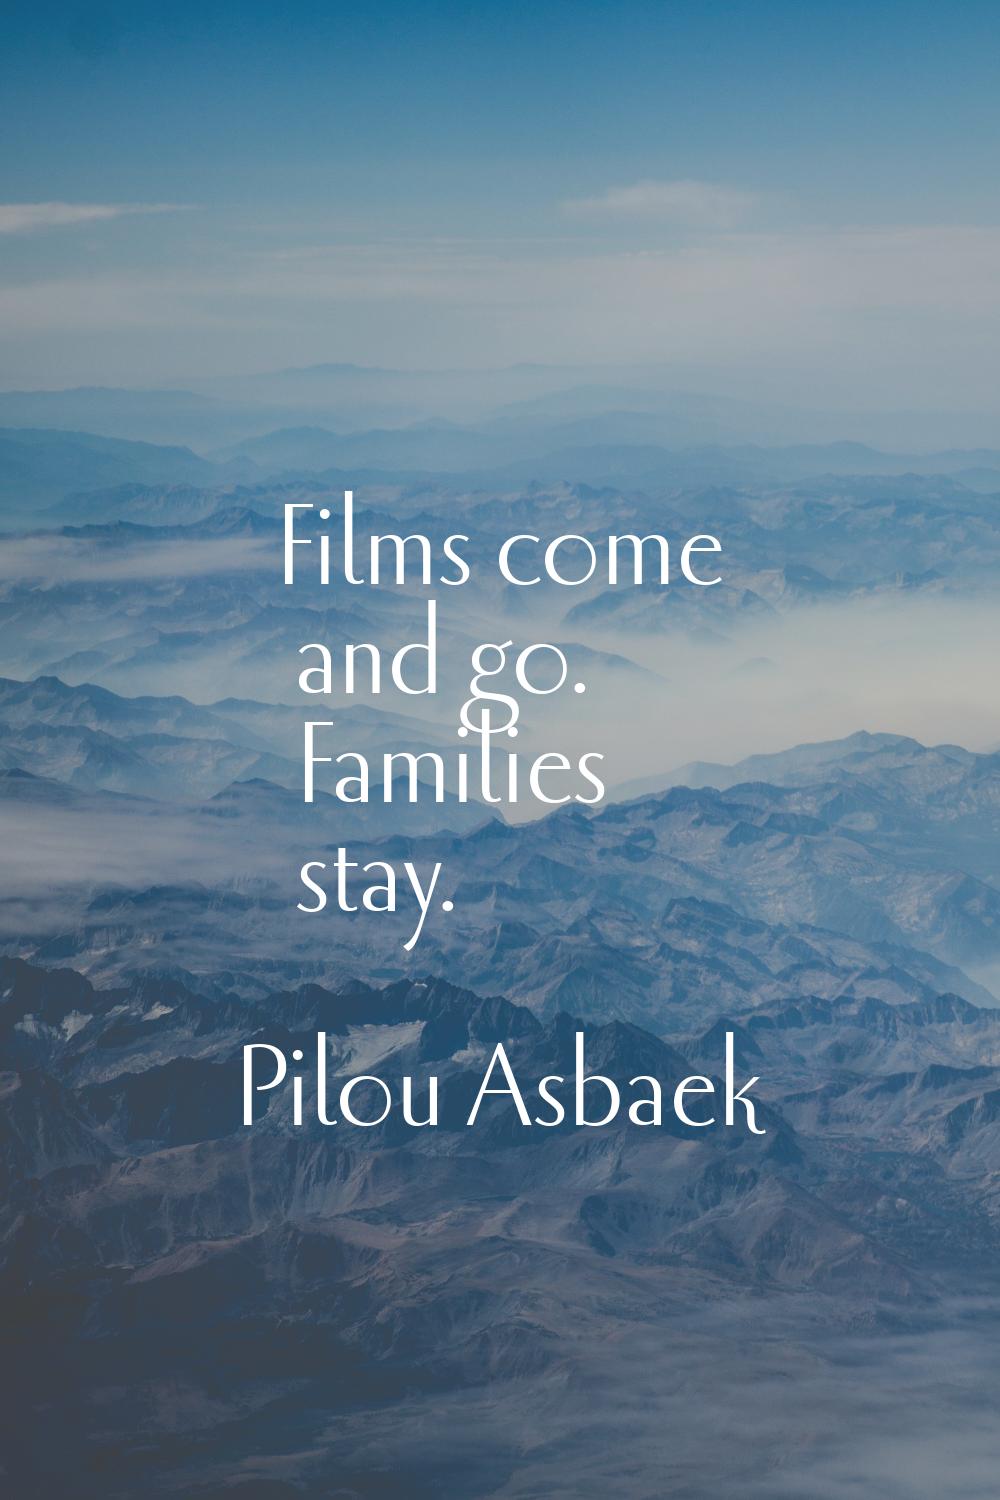 Films come and go. Families stay.